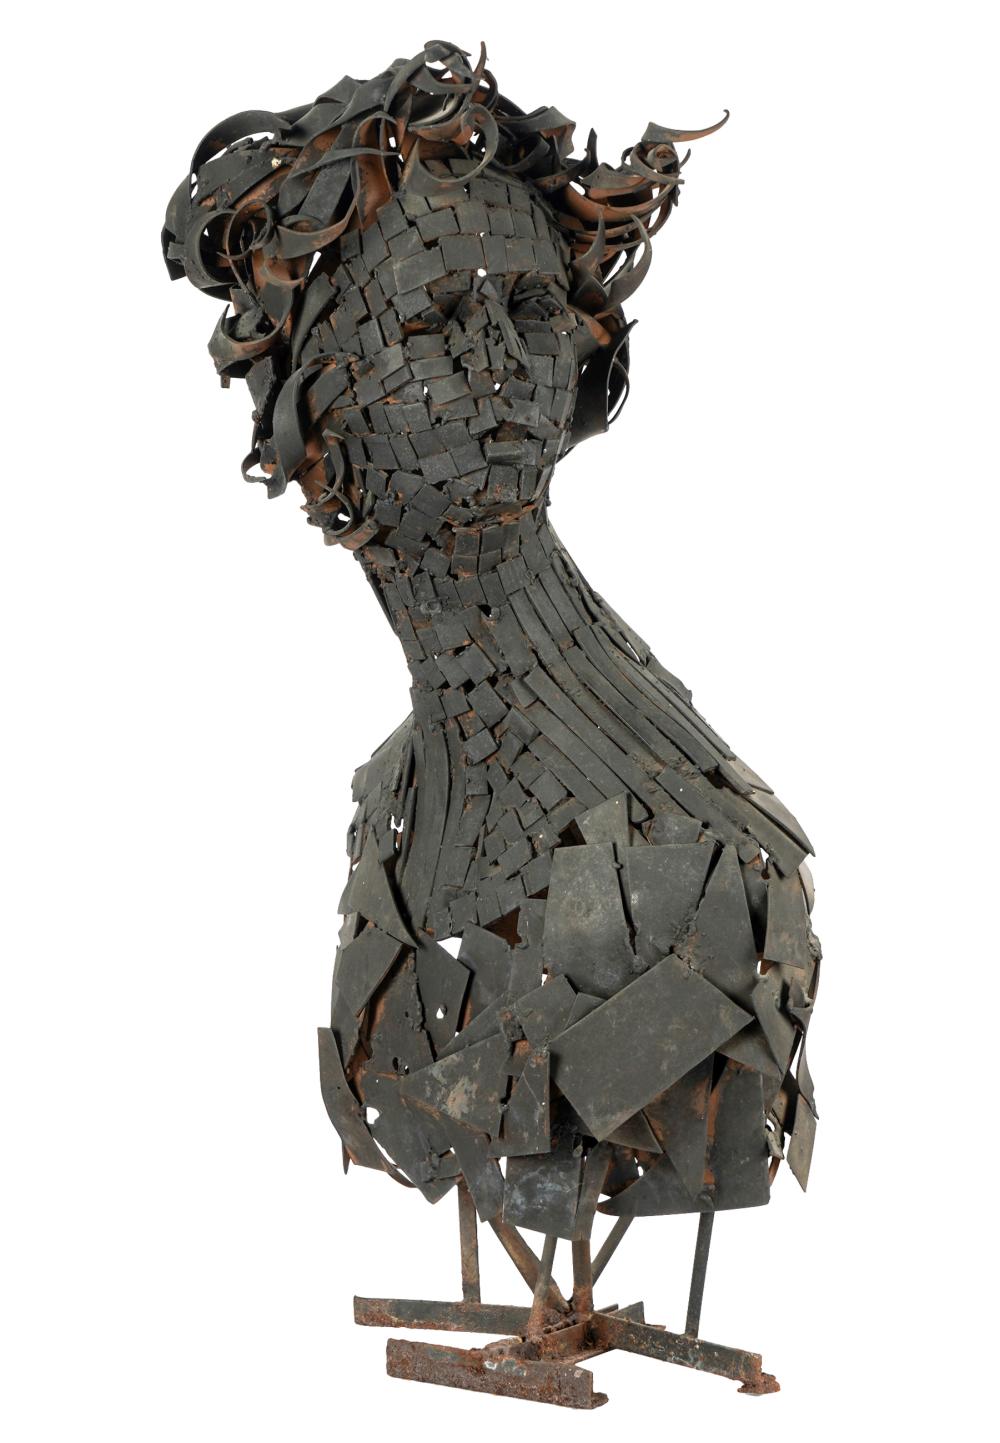 20TH CENTURY: BUST OF A WOMANpieced